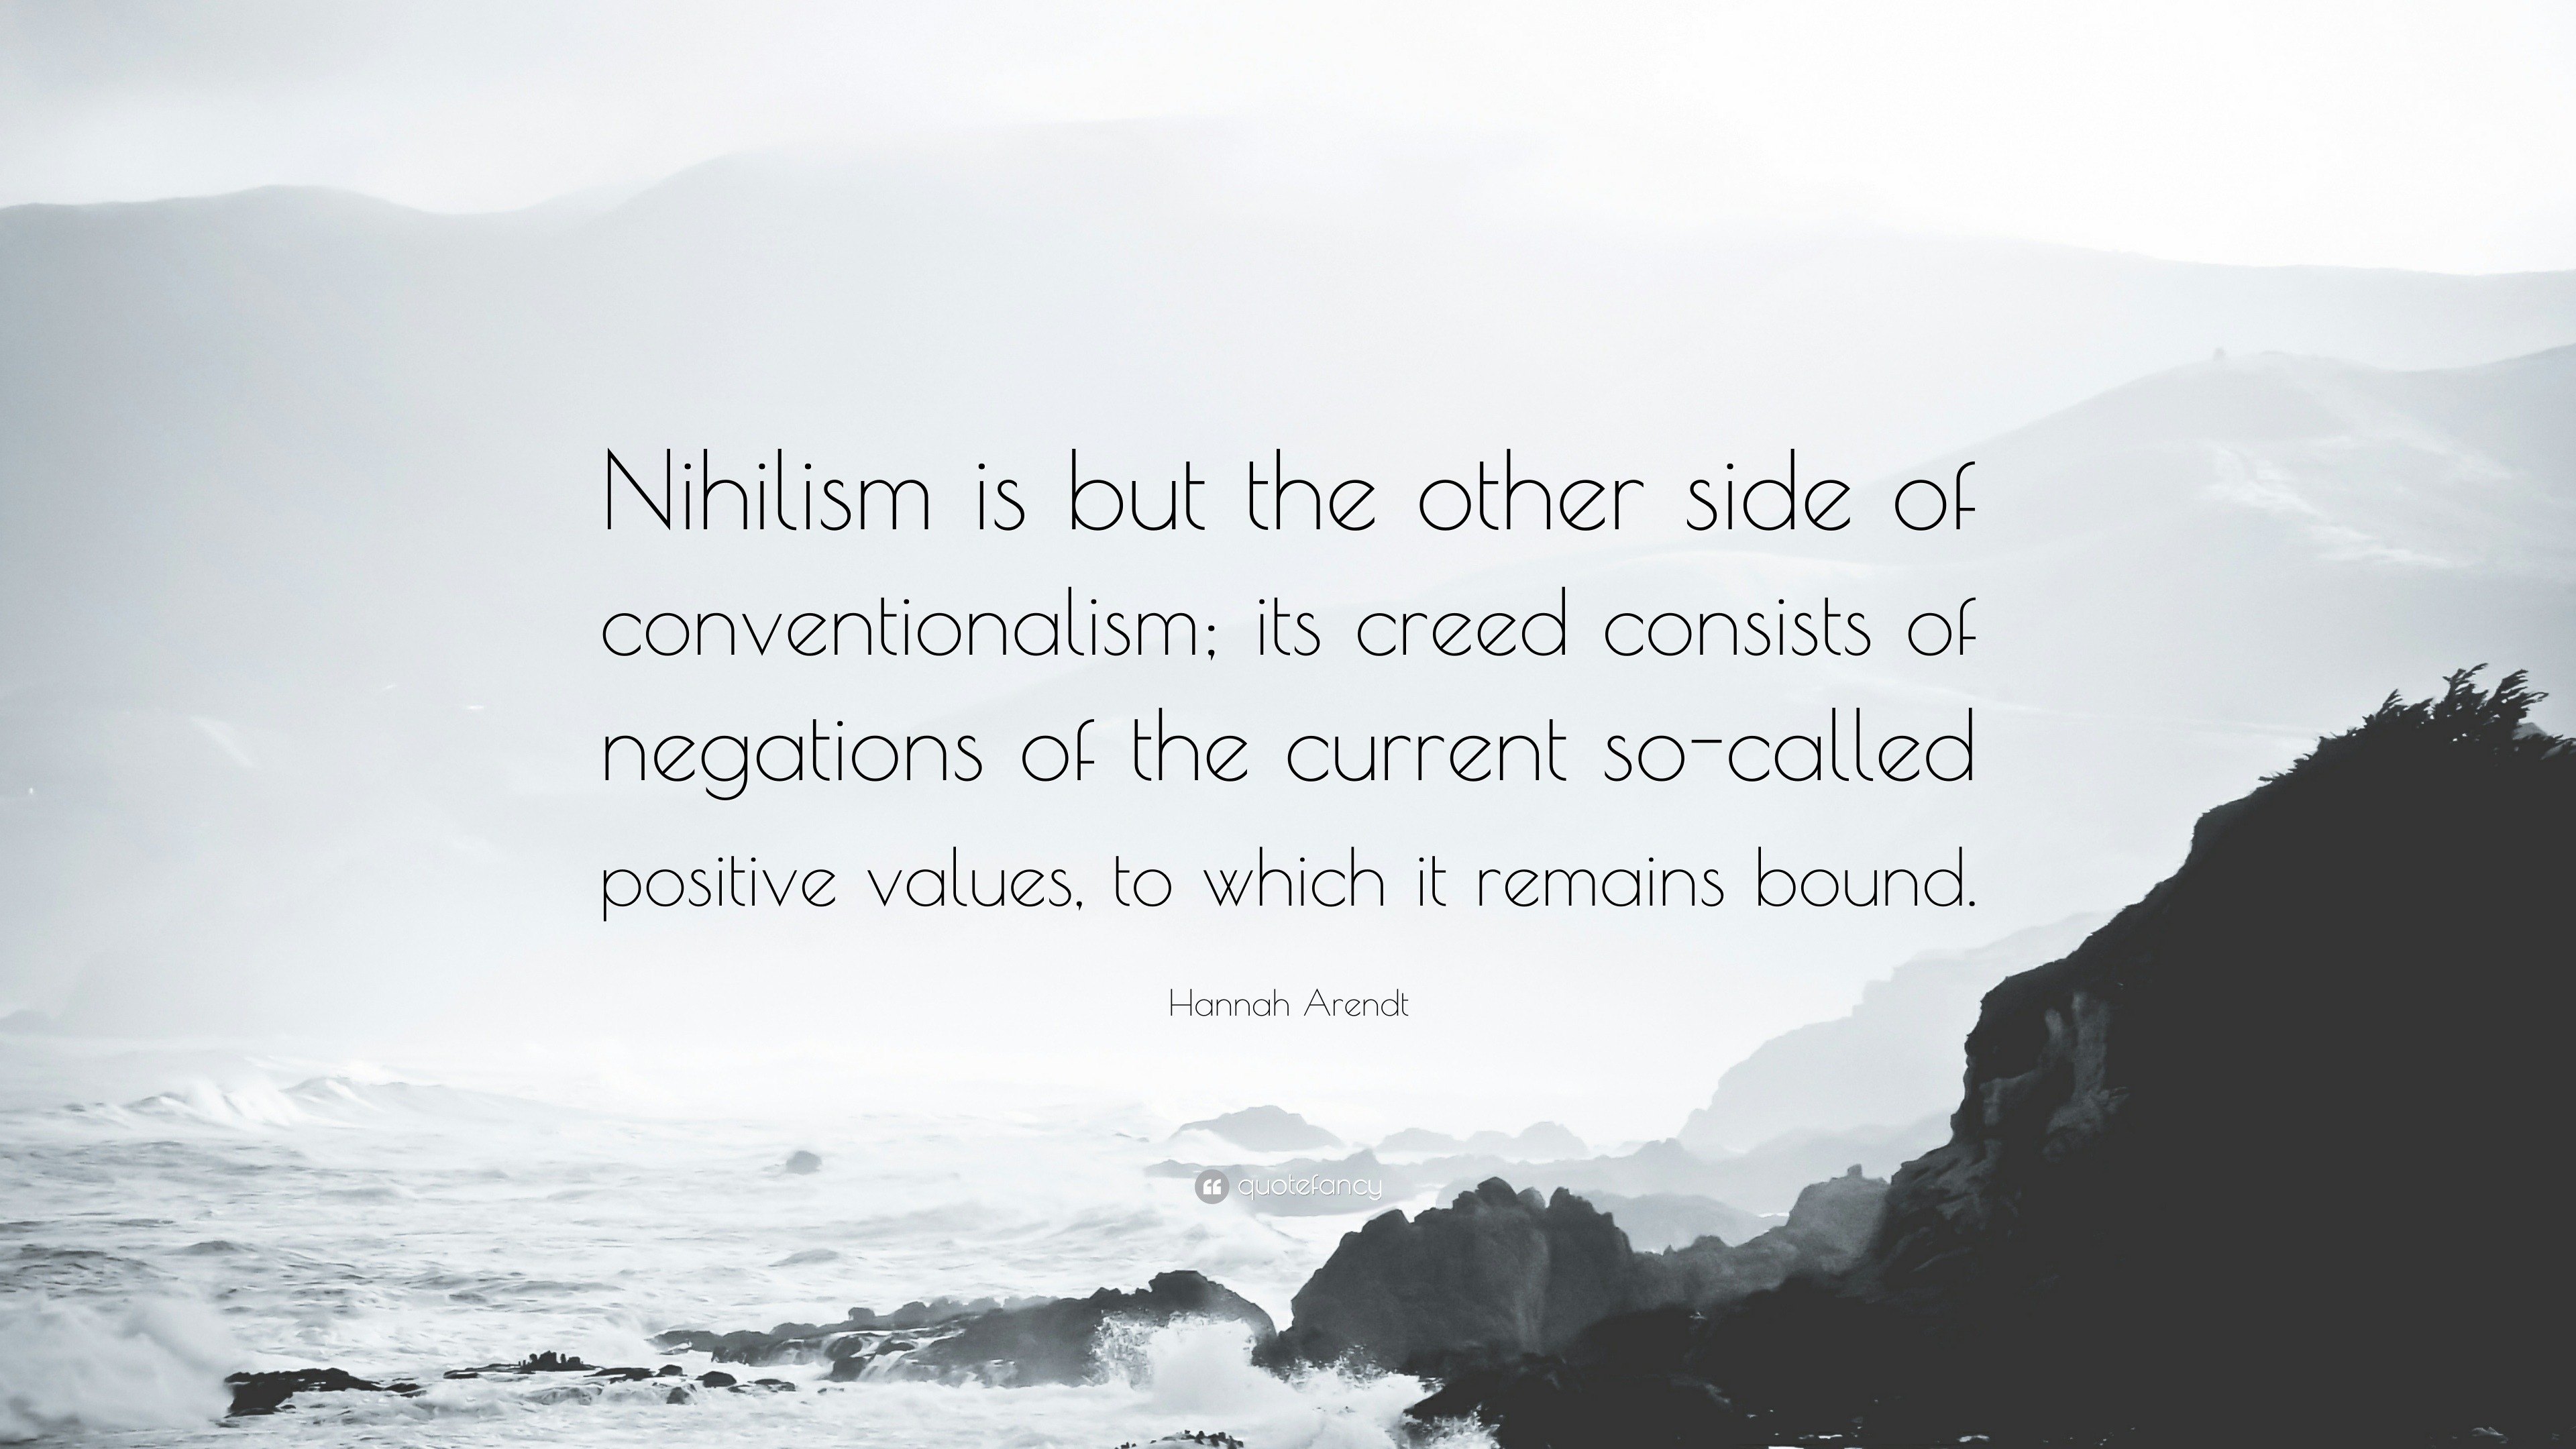 A firm believer : r/nihilism